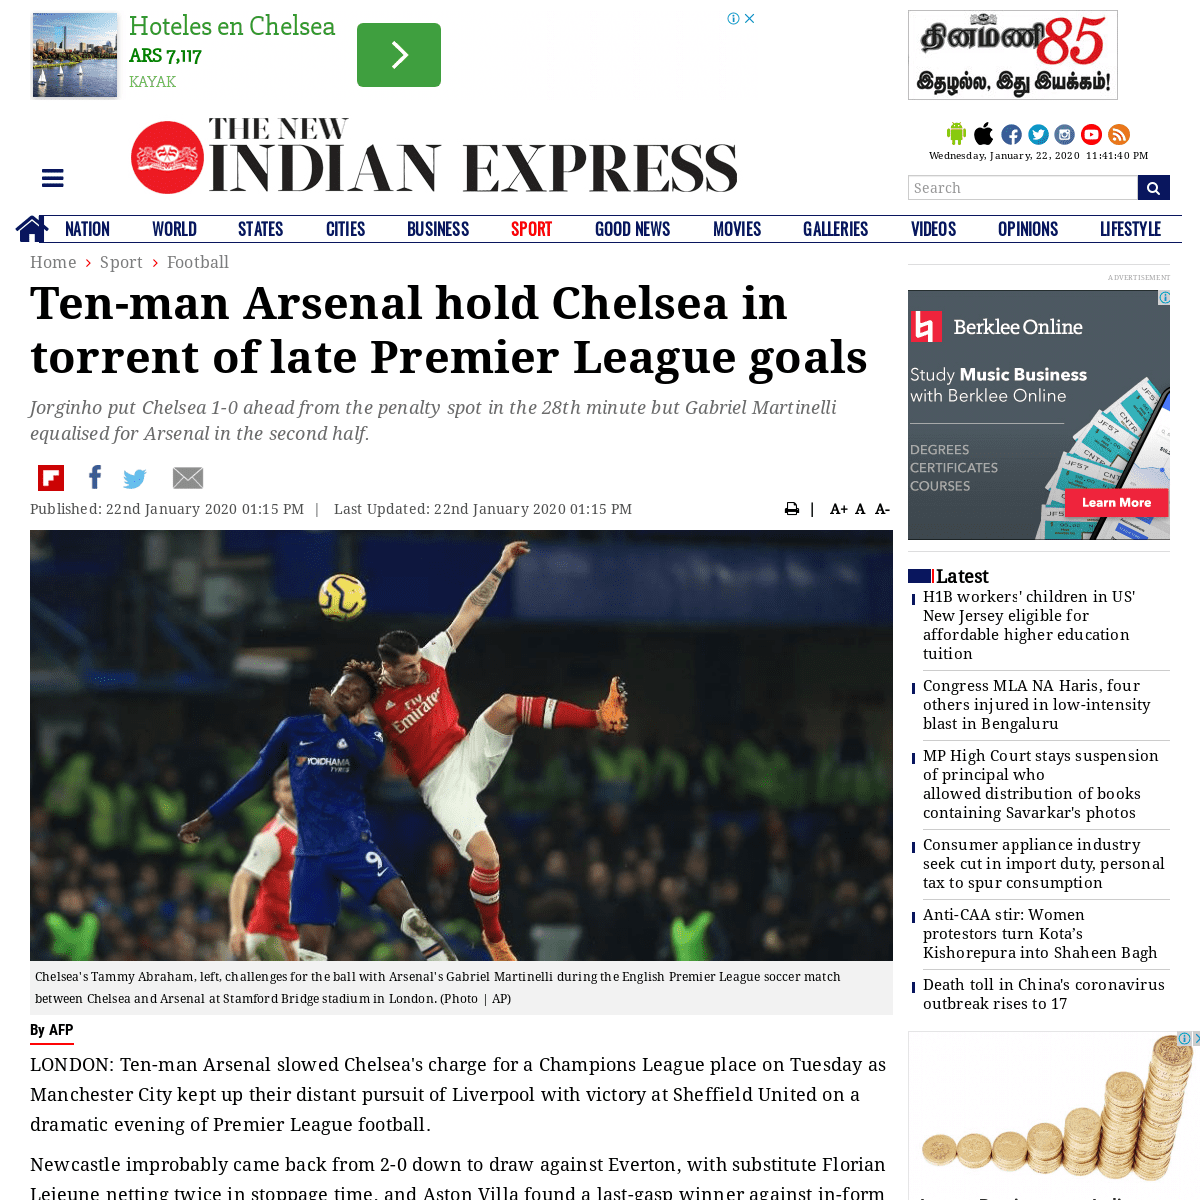 A complete backup of www.newindianexpress.com/sport/football/2020/jan/22/ten-man-arsenal-hold-chelsea-in-torrent-of-late-premier